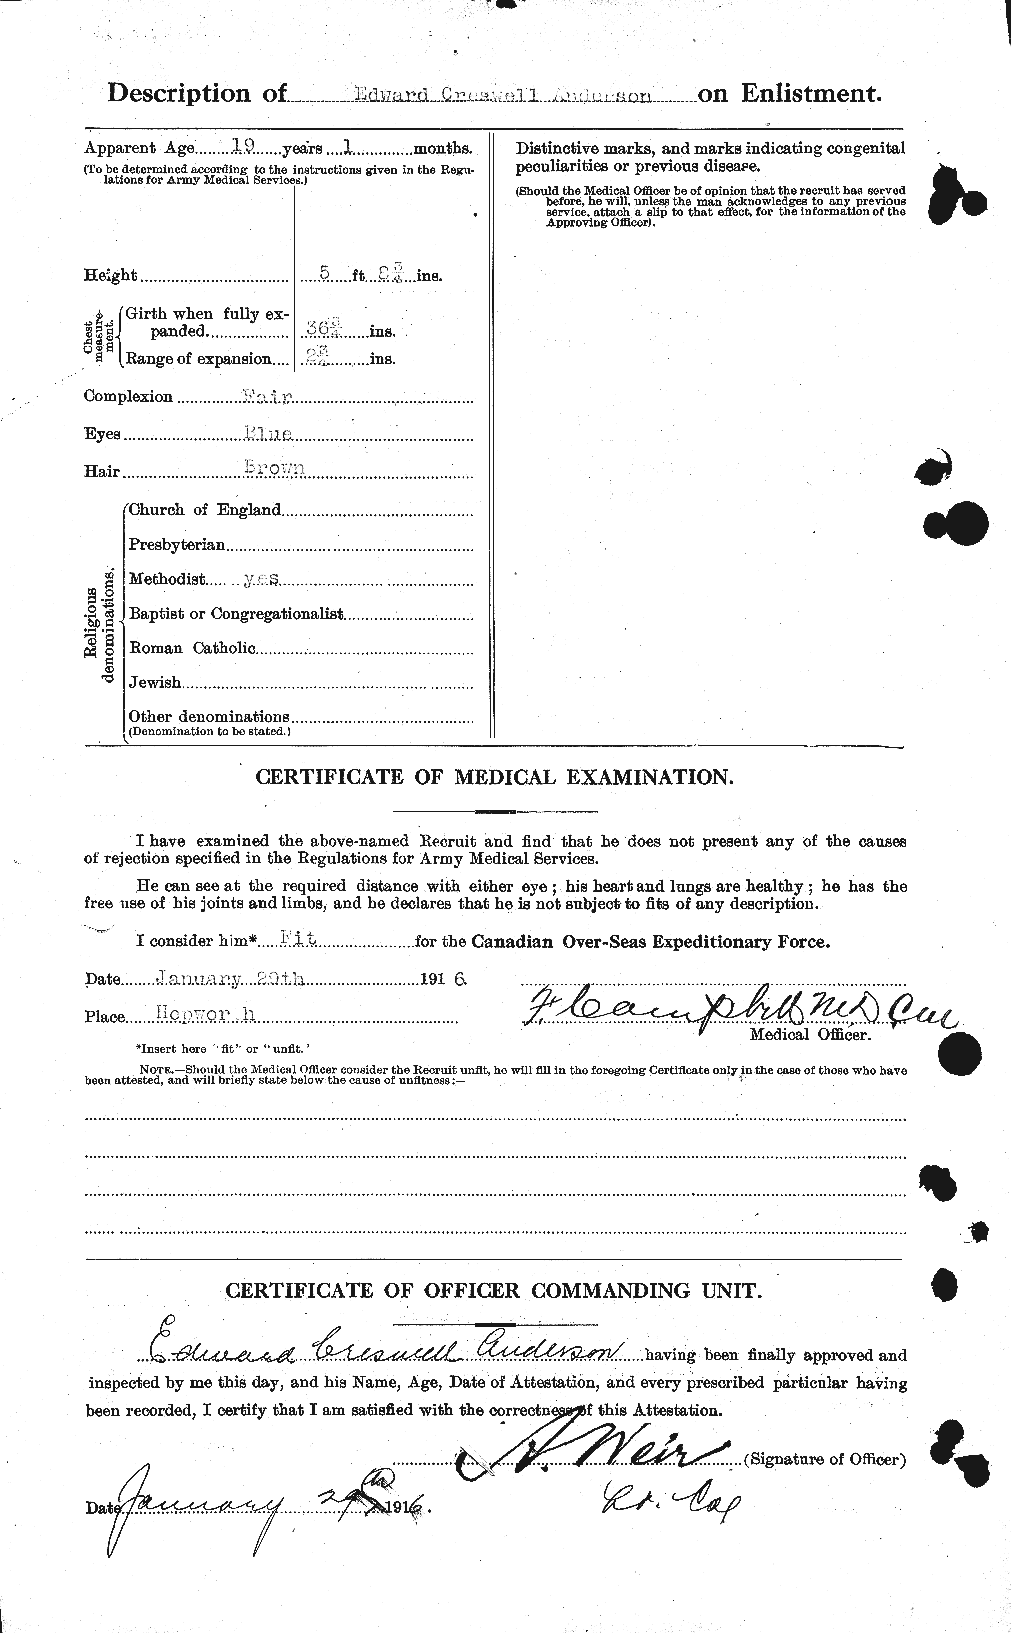 Personnel Records of the First World War - CEF 209939b